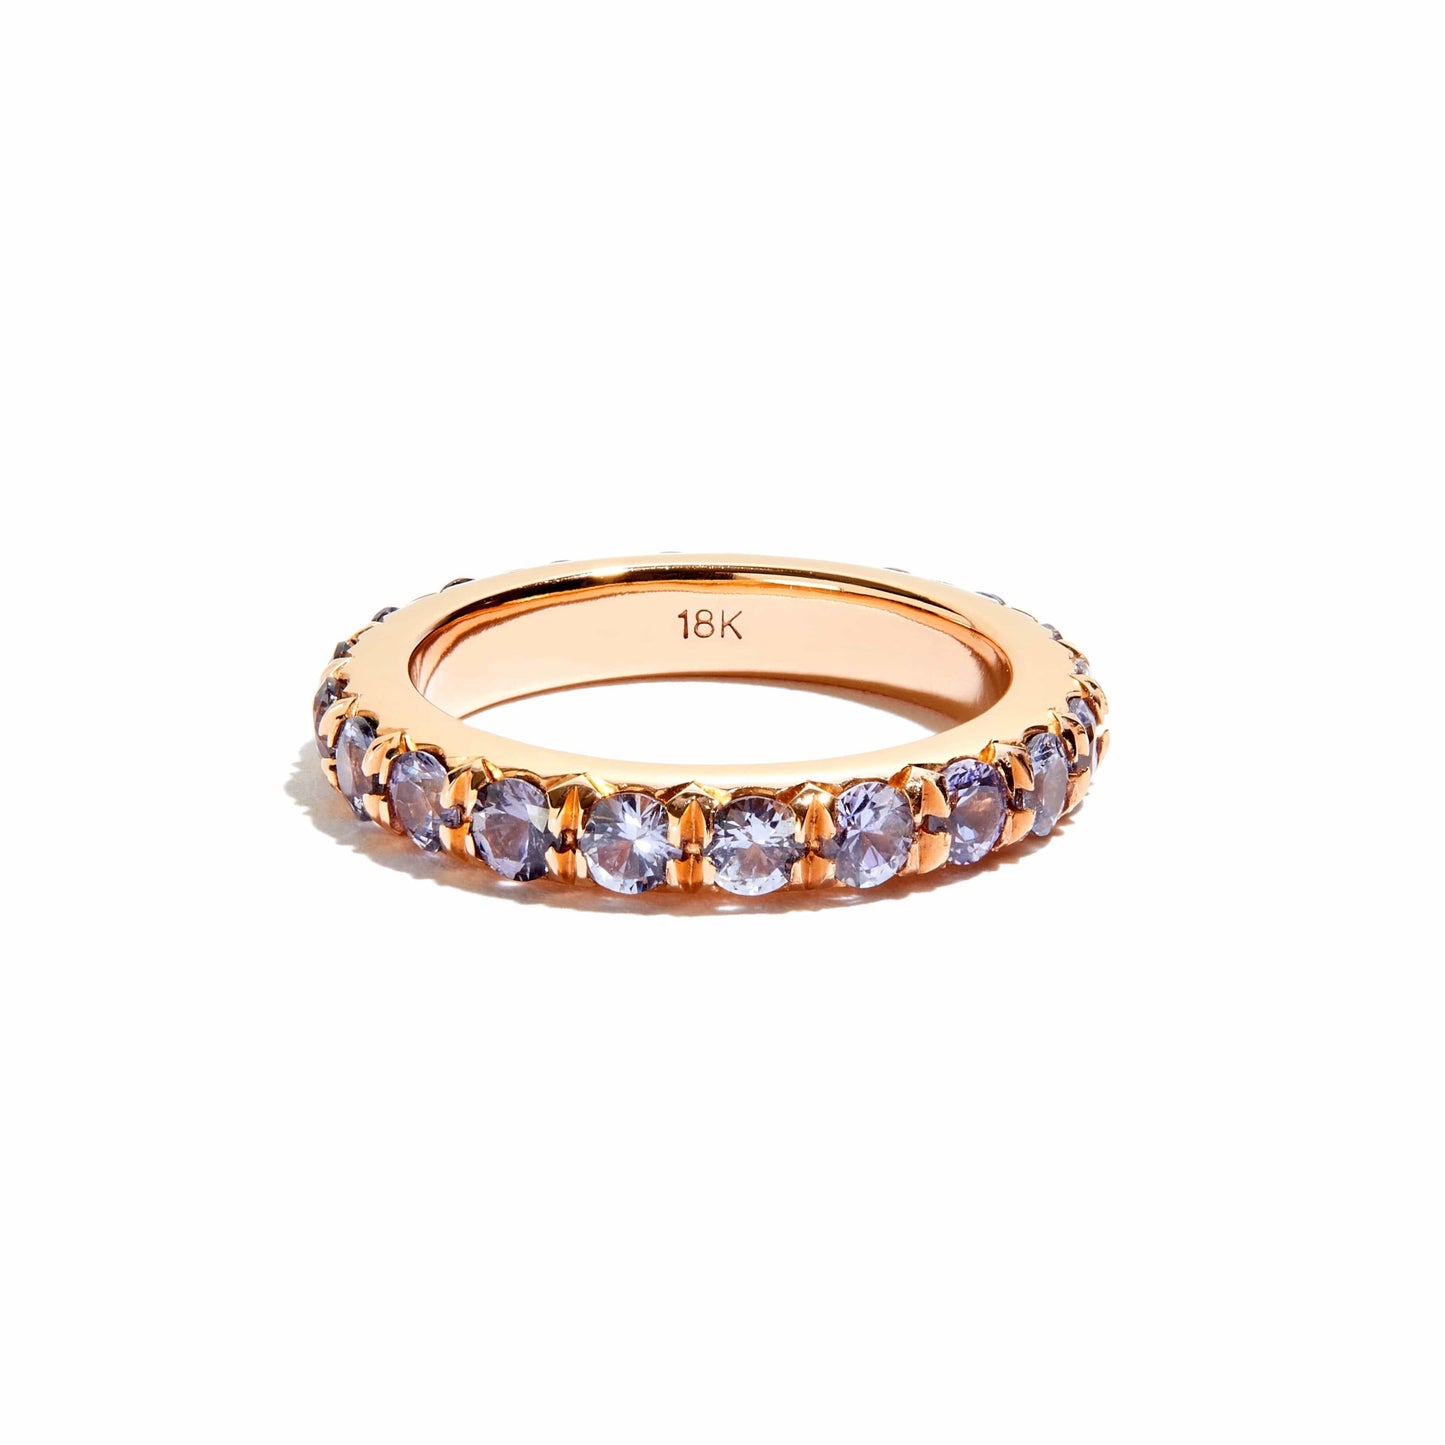 Chunky Lavender Sapphire Eternity Band - 18k Rose Gold Size 5.5